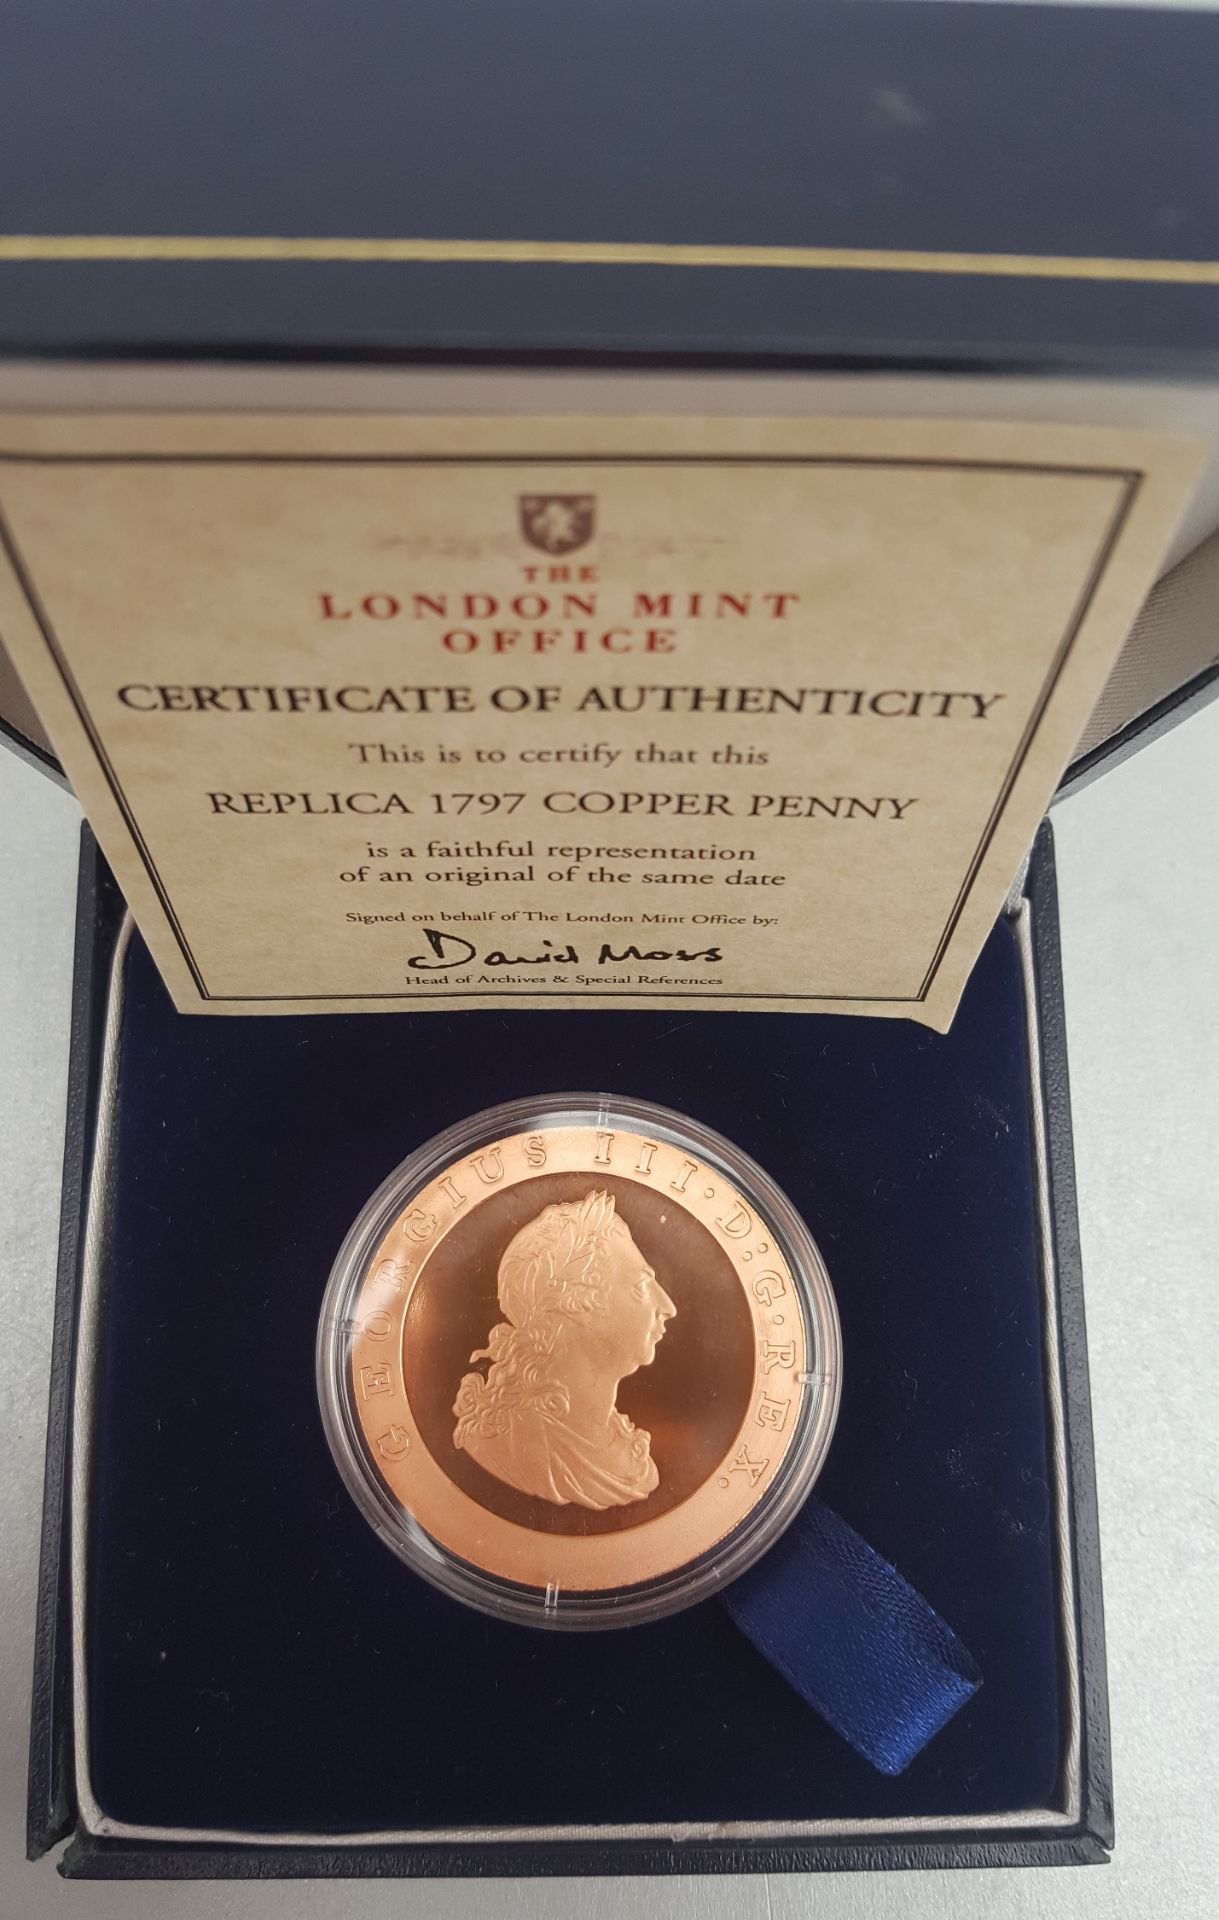 Collectable Coin London Mint Office Replica 1797 Copper Penny